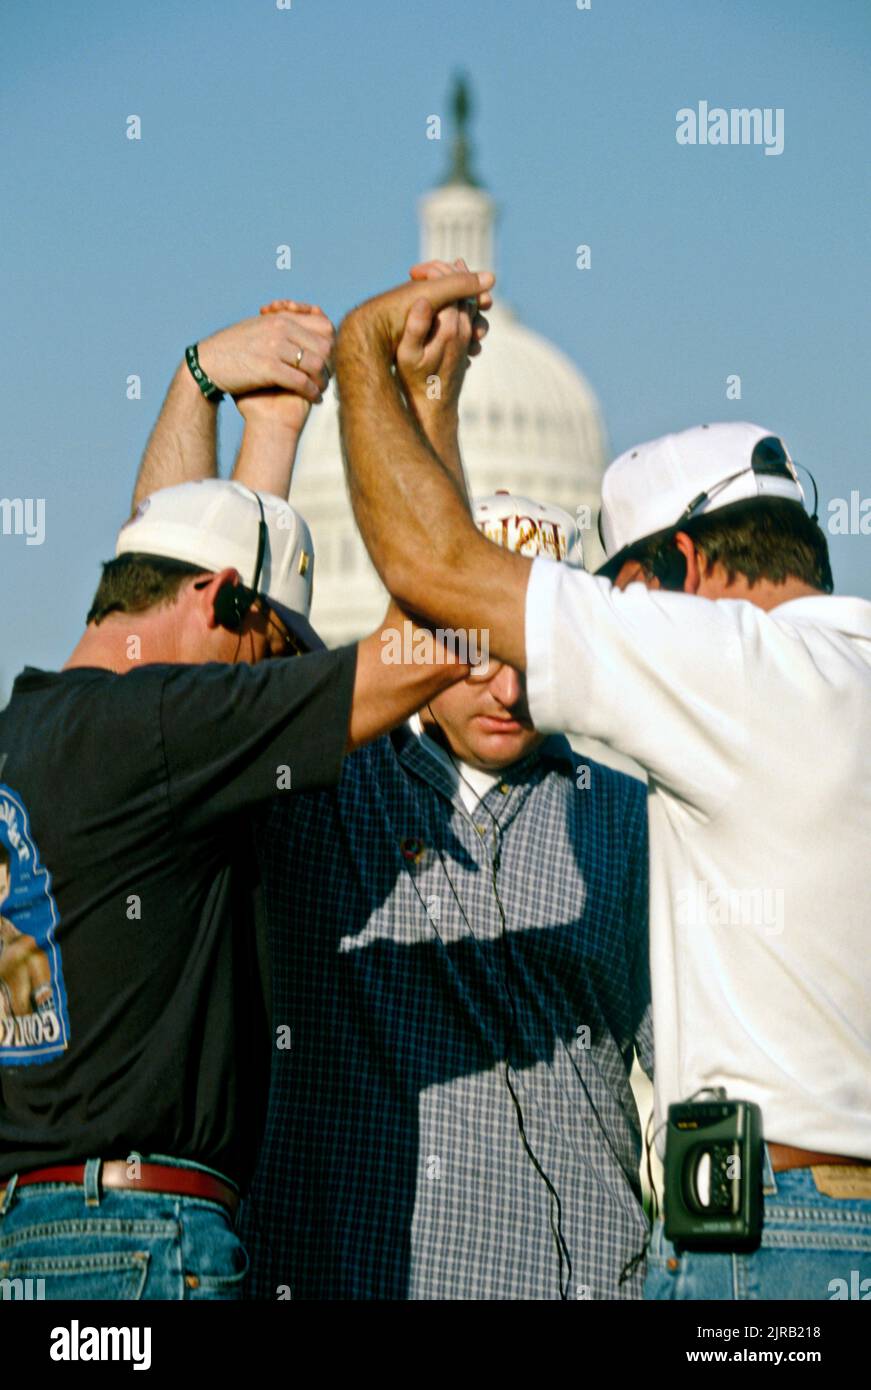 Members of the Promise Keepers, a conservative Christian organization, pray during a service on the National Mall, October 4, 1997 in Washington, DC. An estimated 700,000 men gathered for the 'Stand in the Gap: A Sacred Assembly of Men' prayer event. Stock Photo